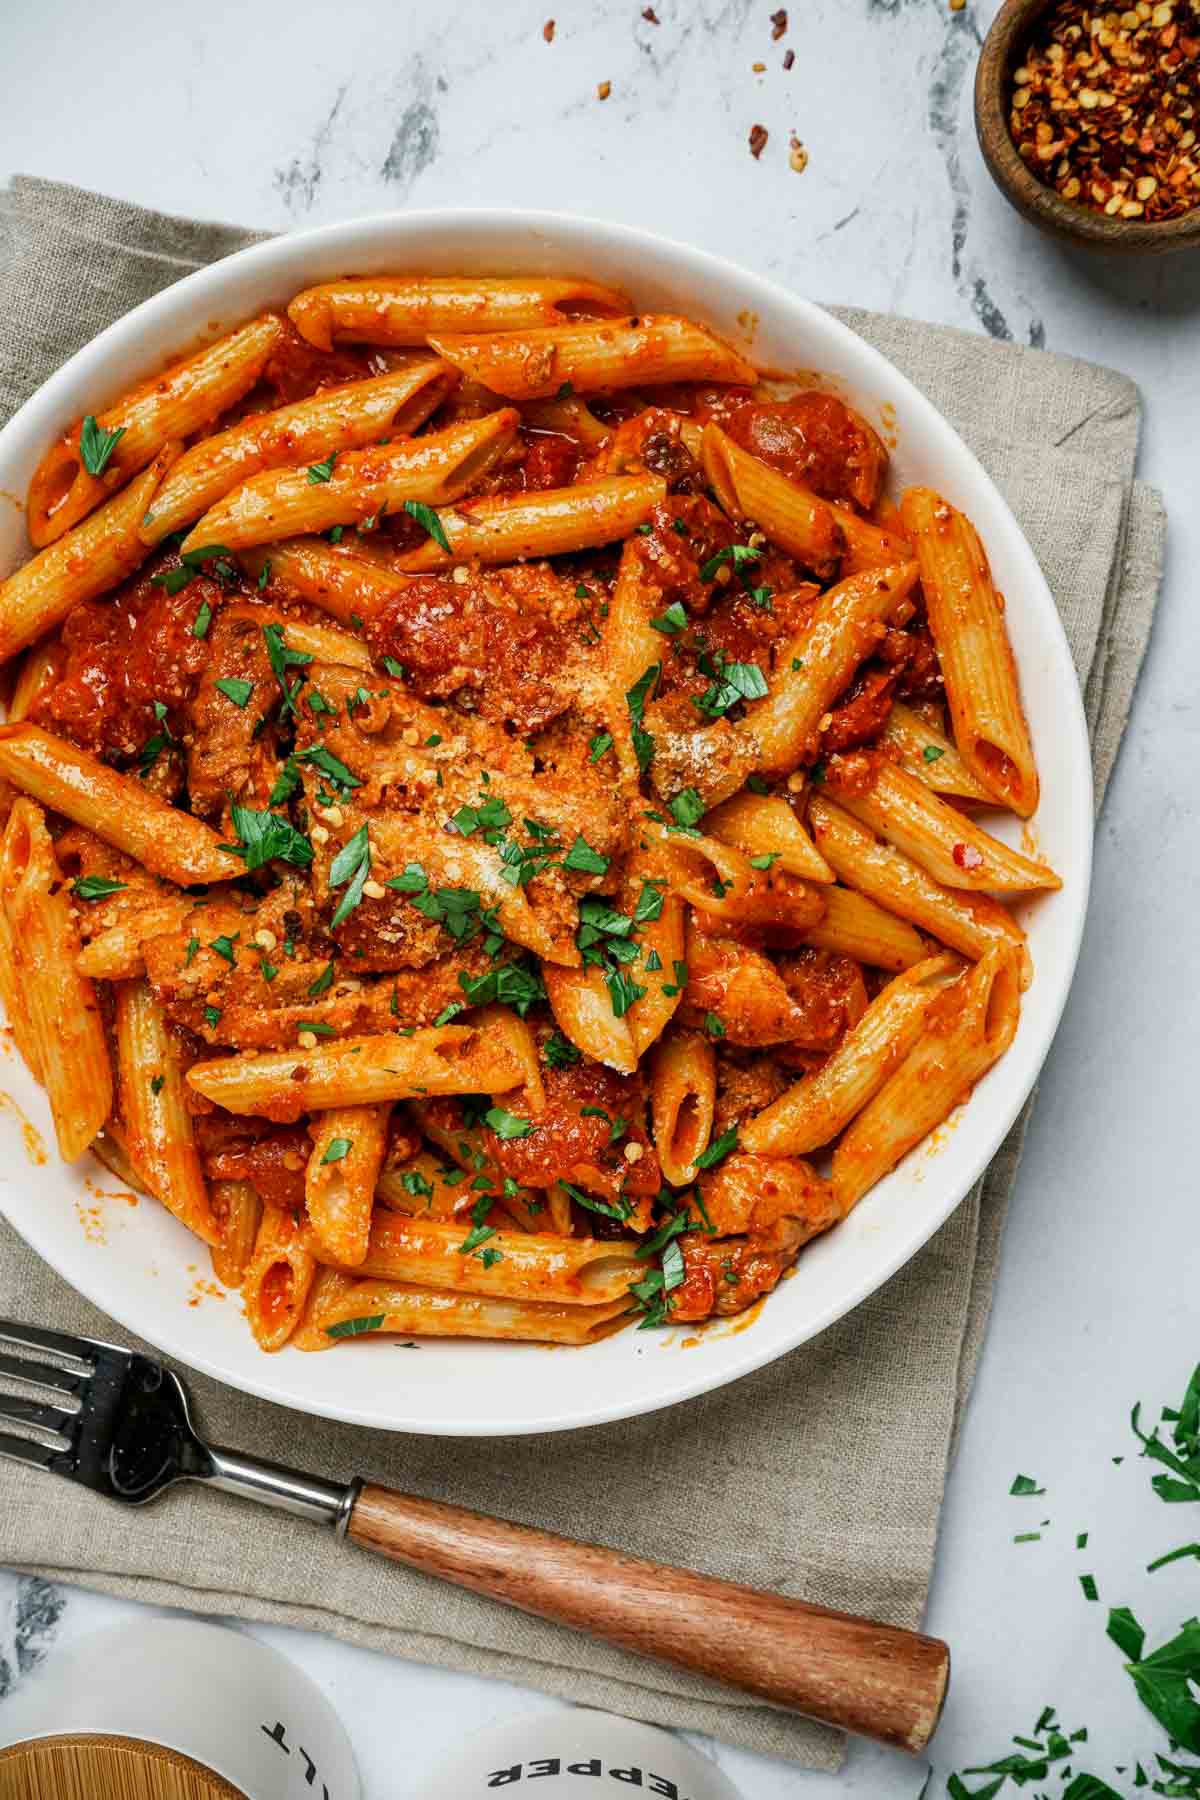 a bowl of pasta in red sauce garnished with green herbs